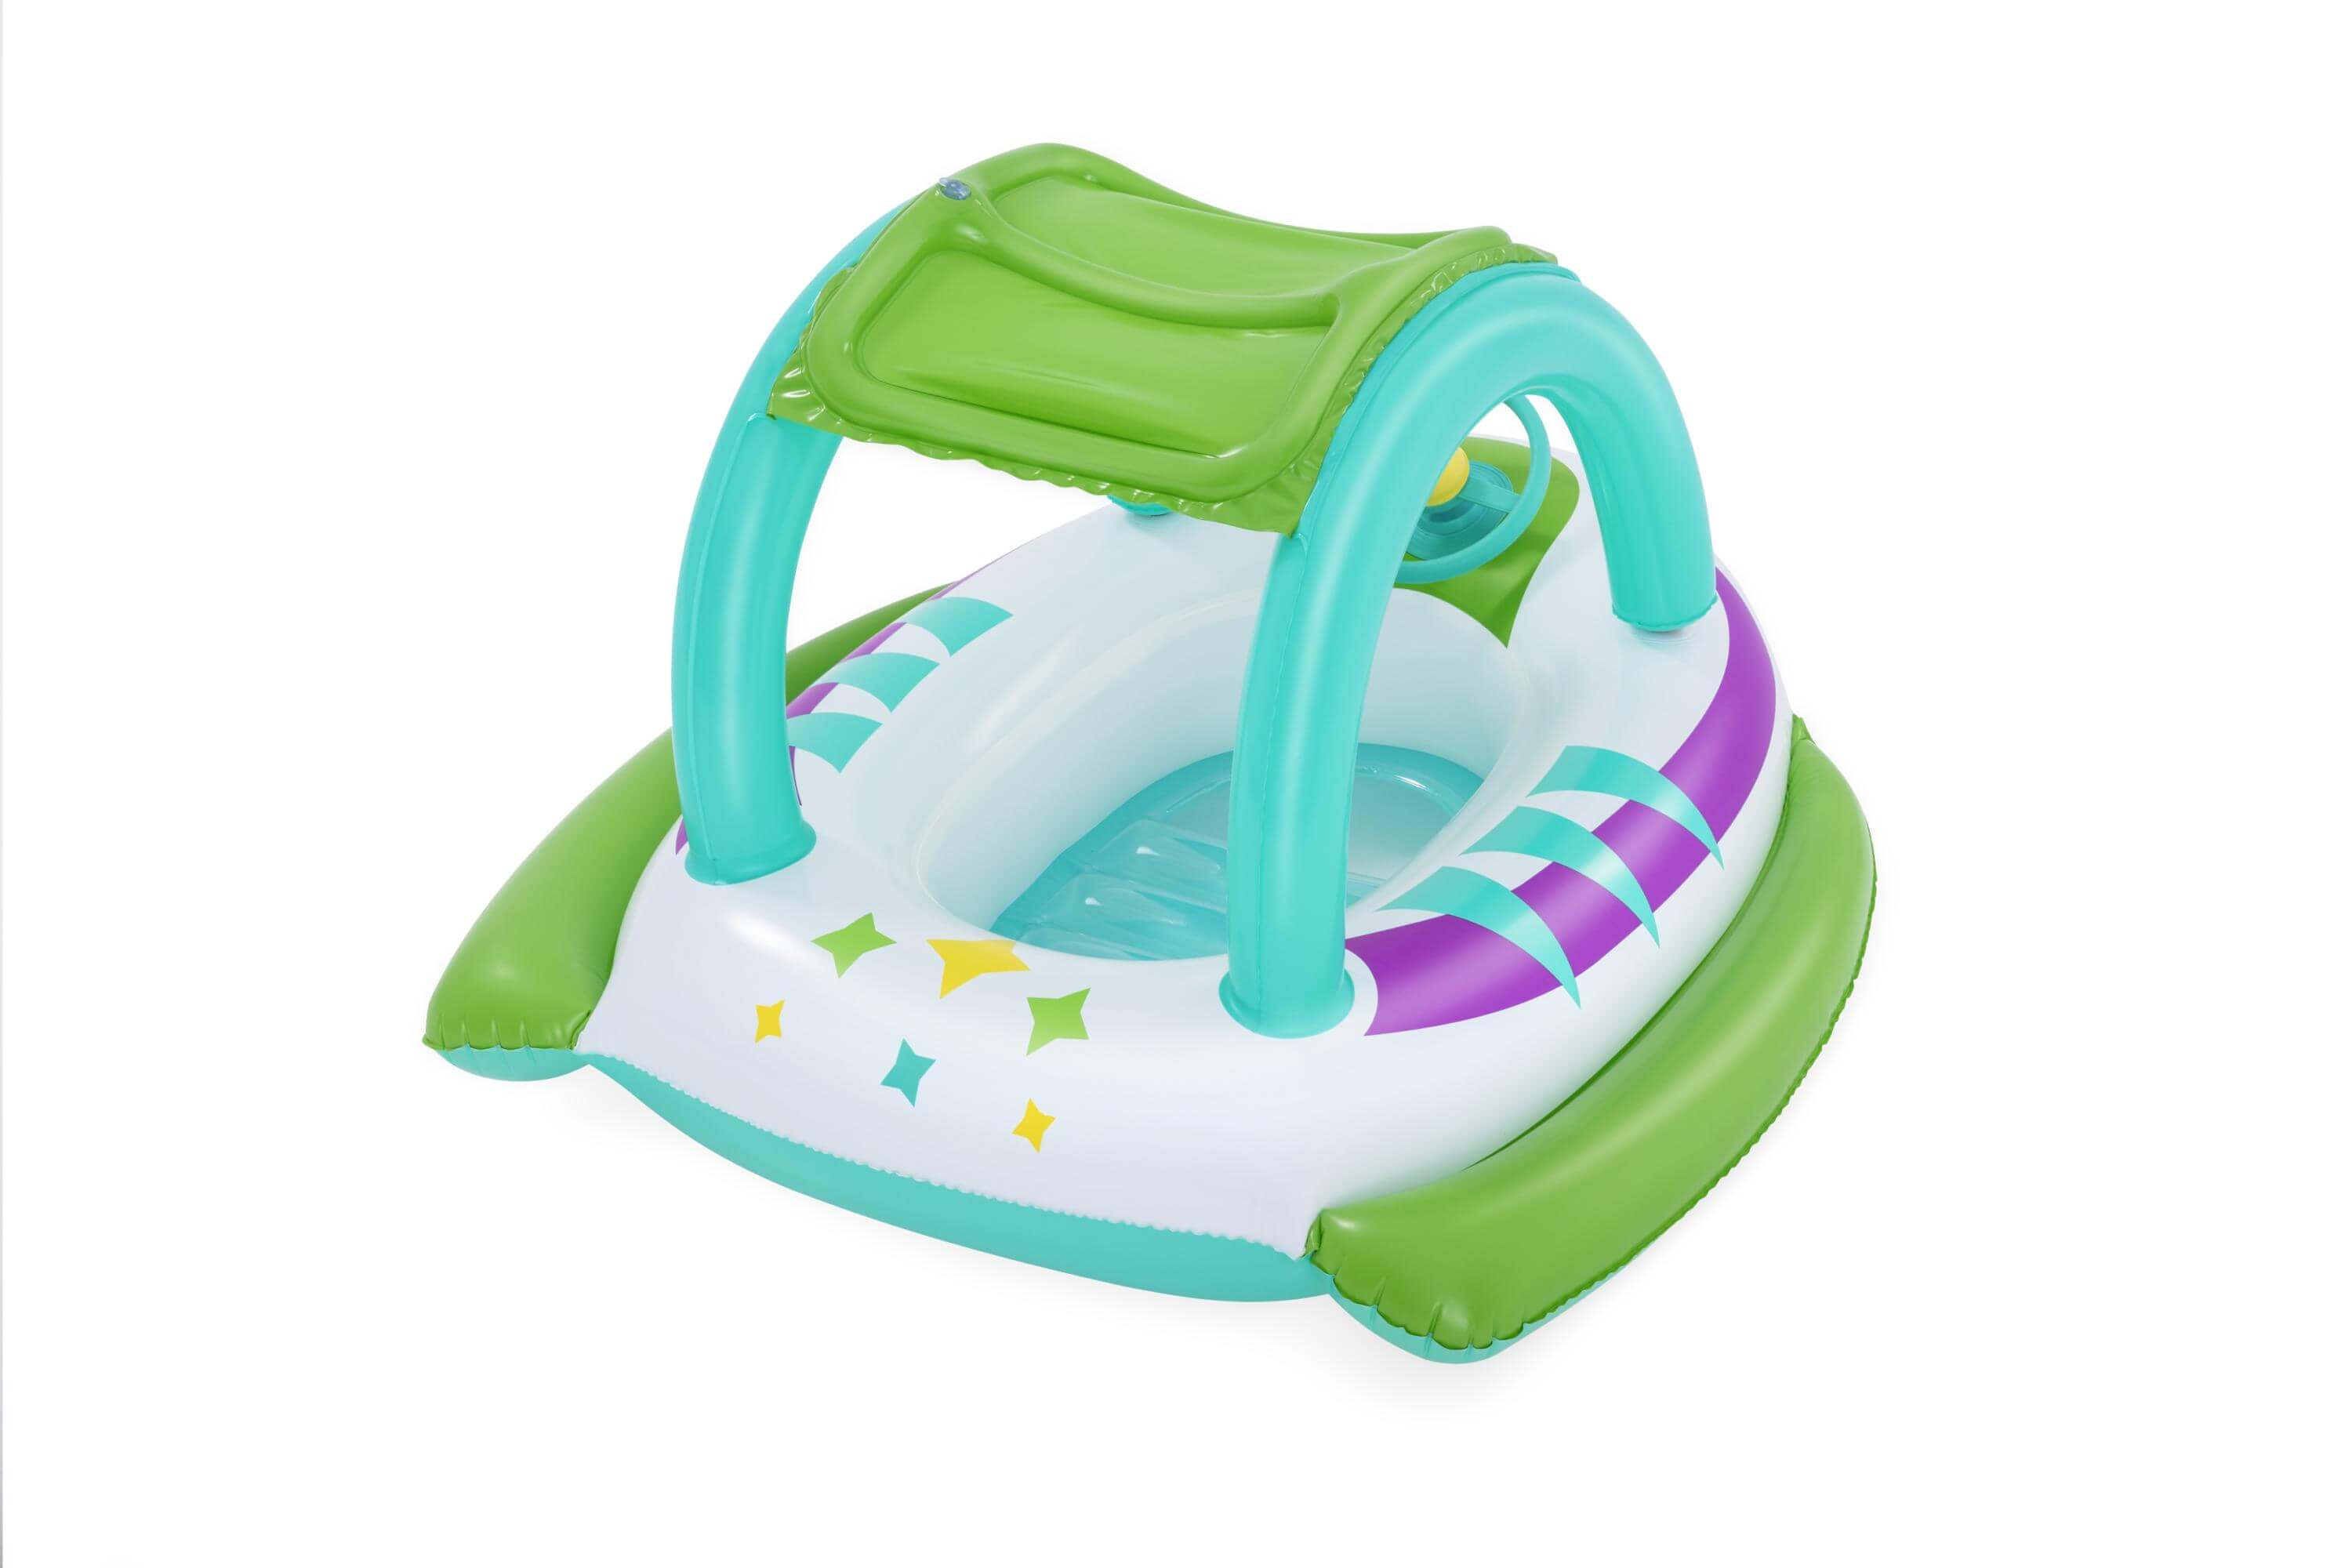 BESTWAY 34149 SPACE SPLASH BABY BOAT AND POOL FLOATS 107X112CM